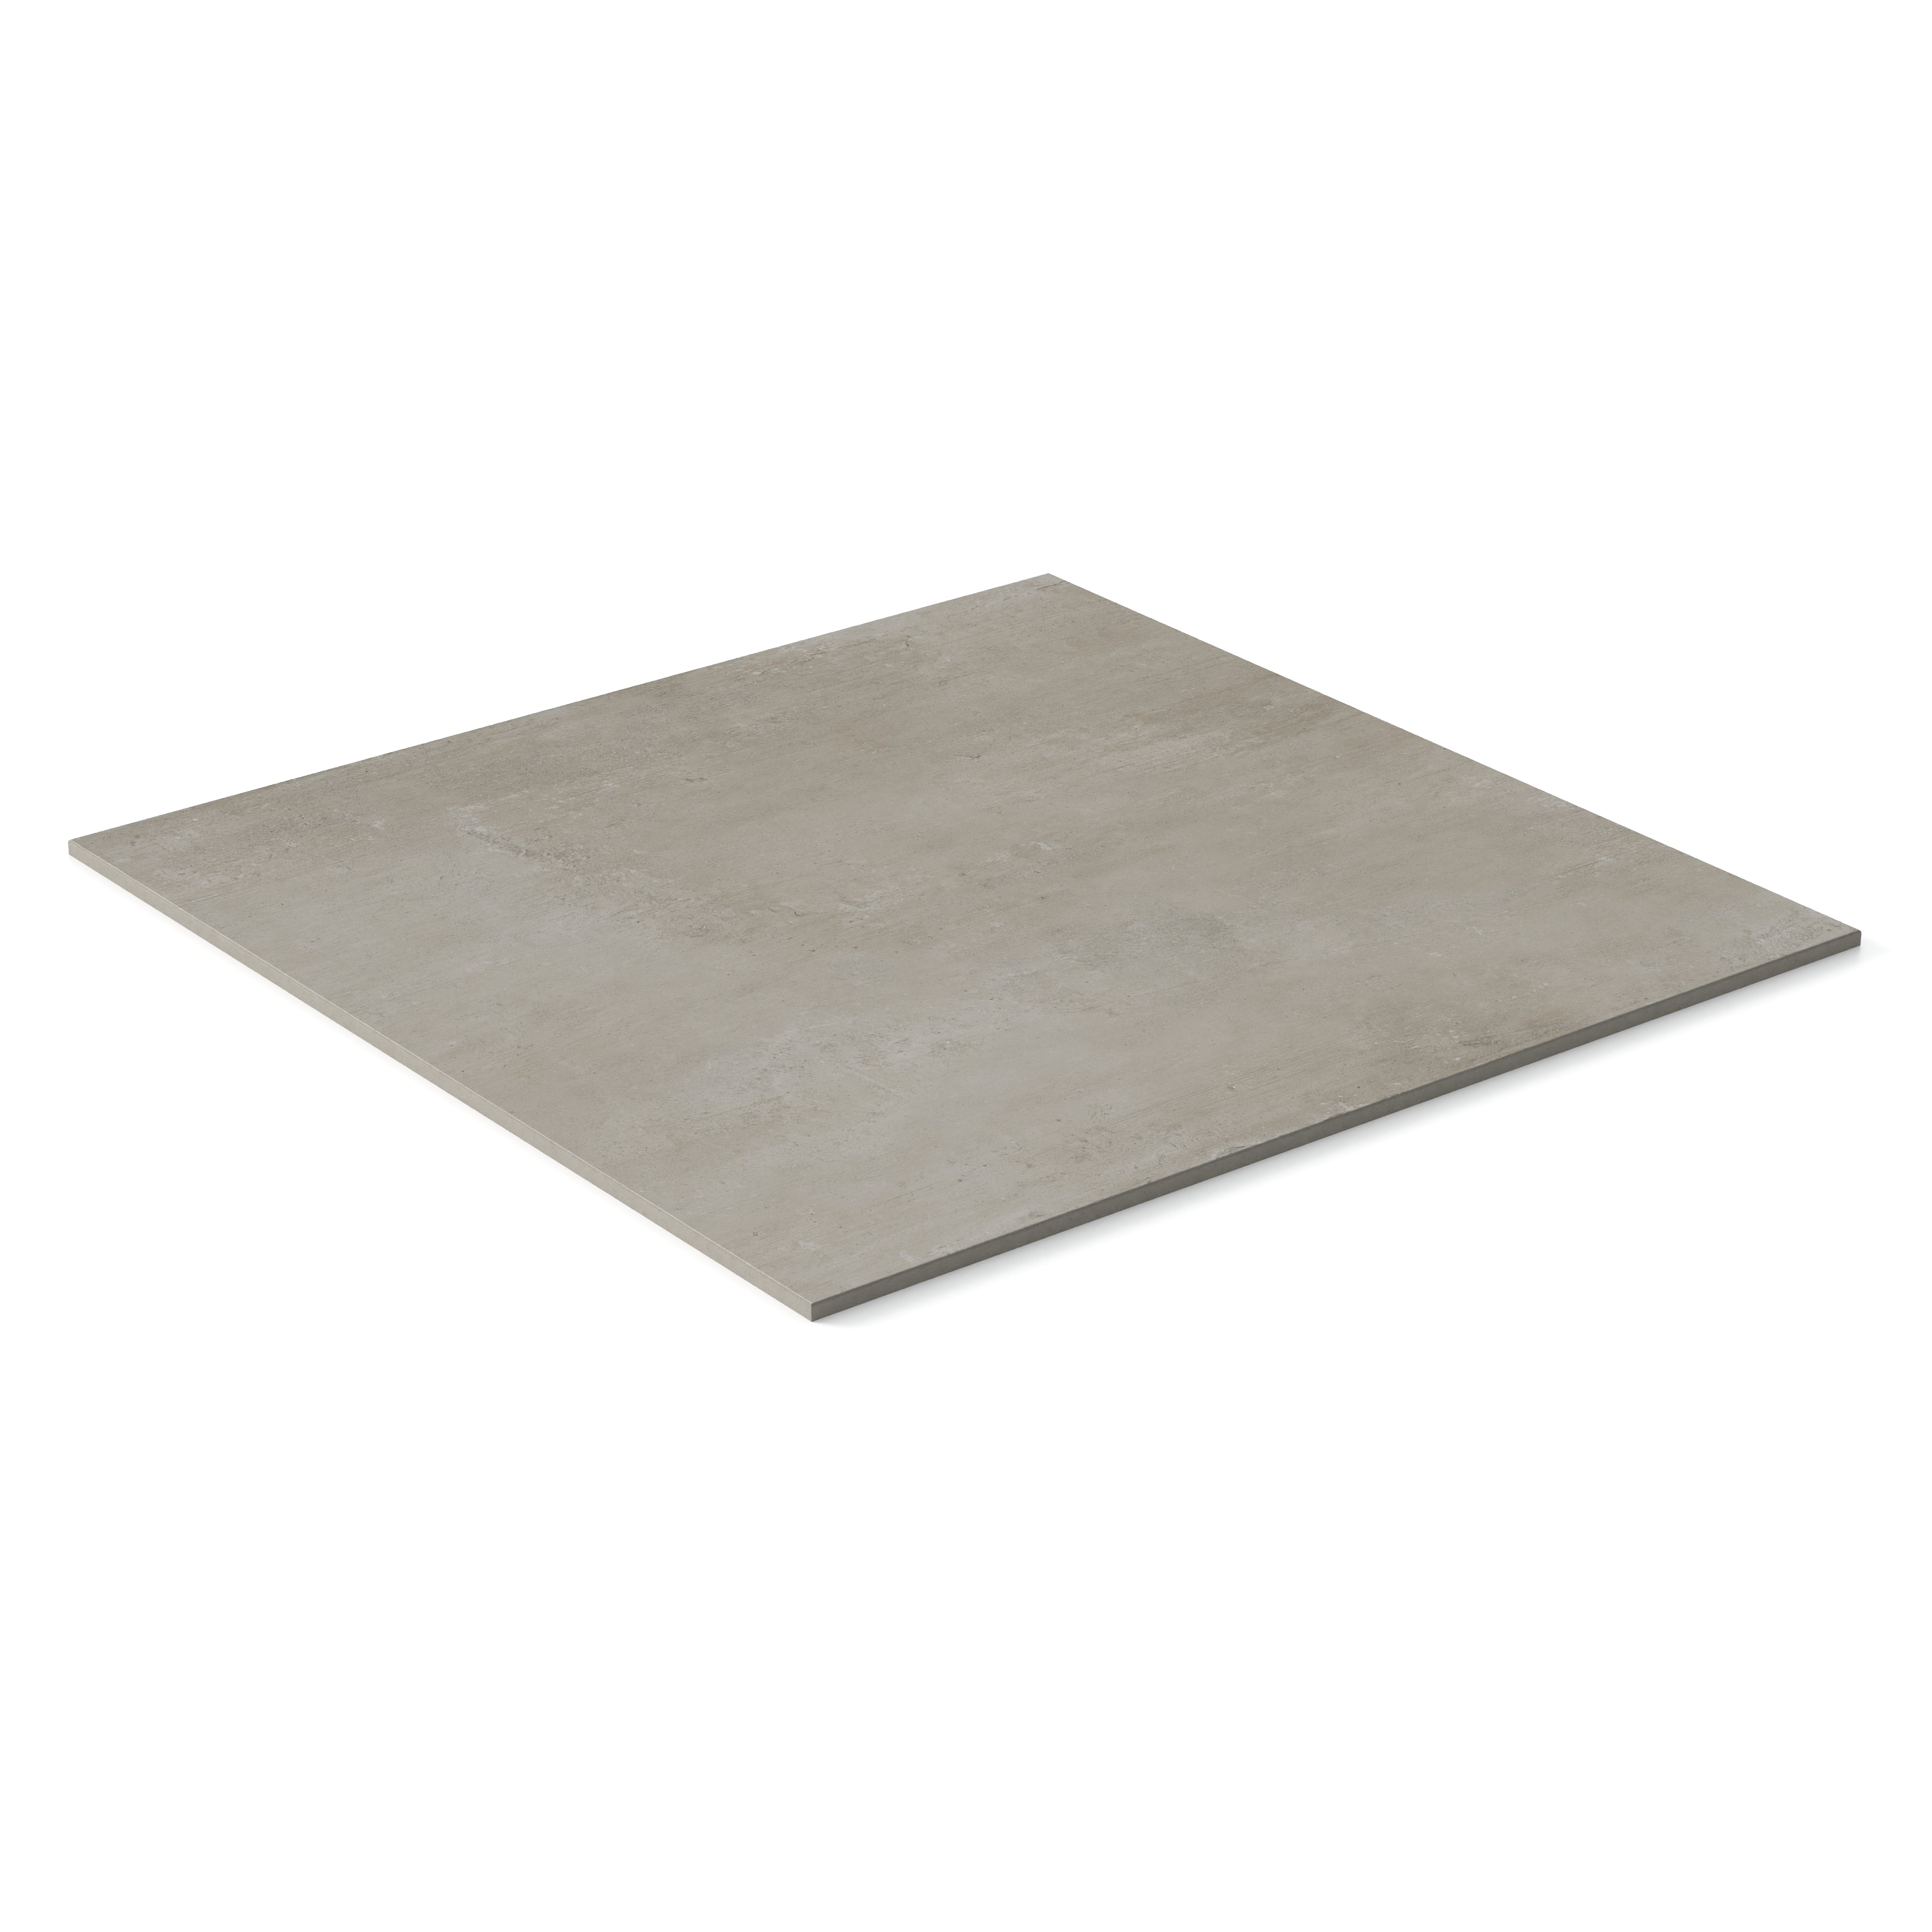 Ramsey 24x24 Matte Porcelain Tile in Putty